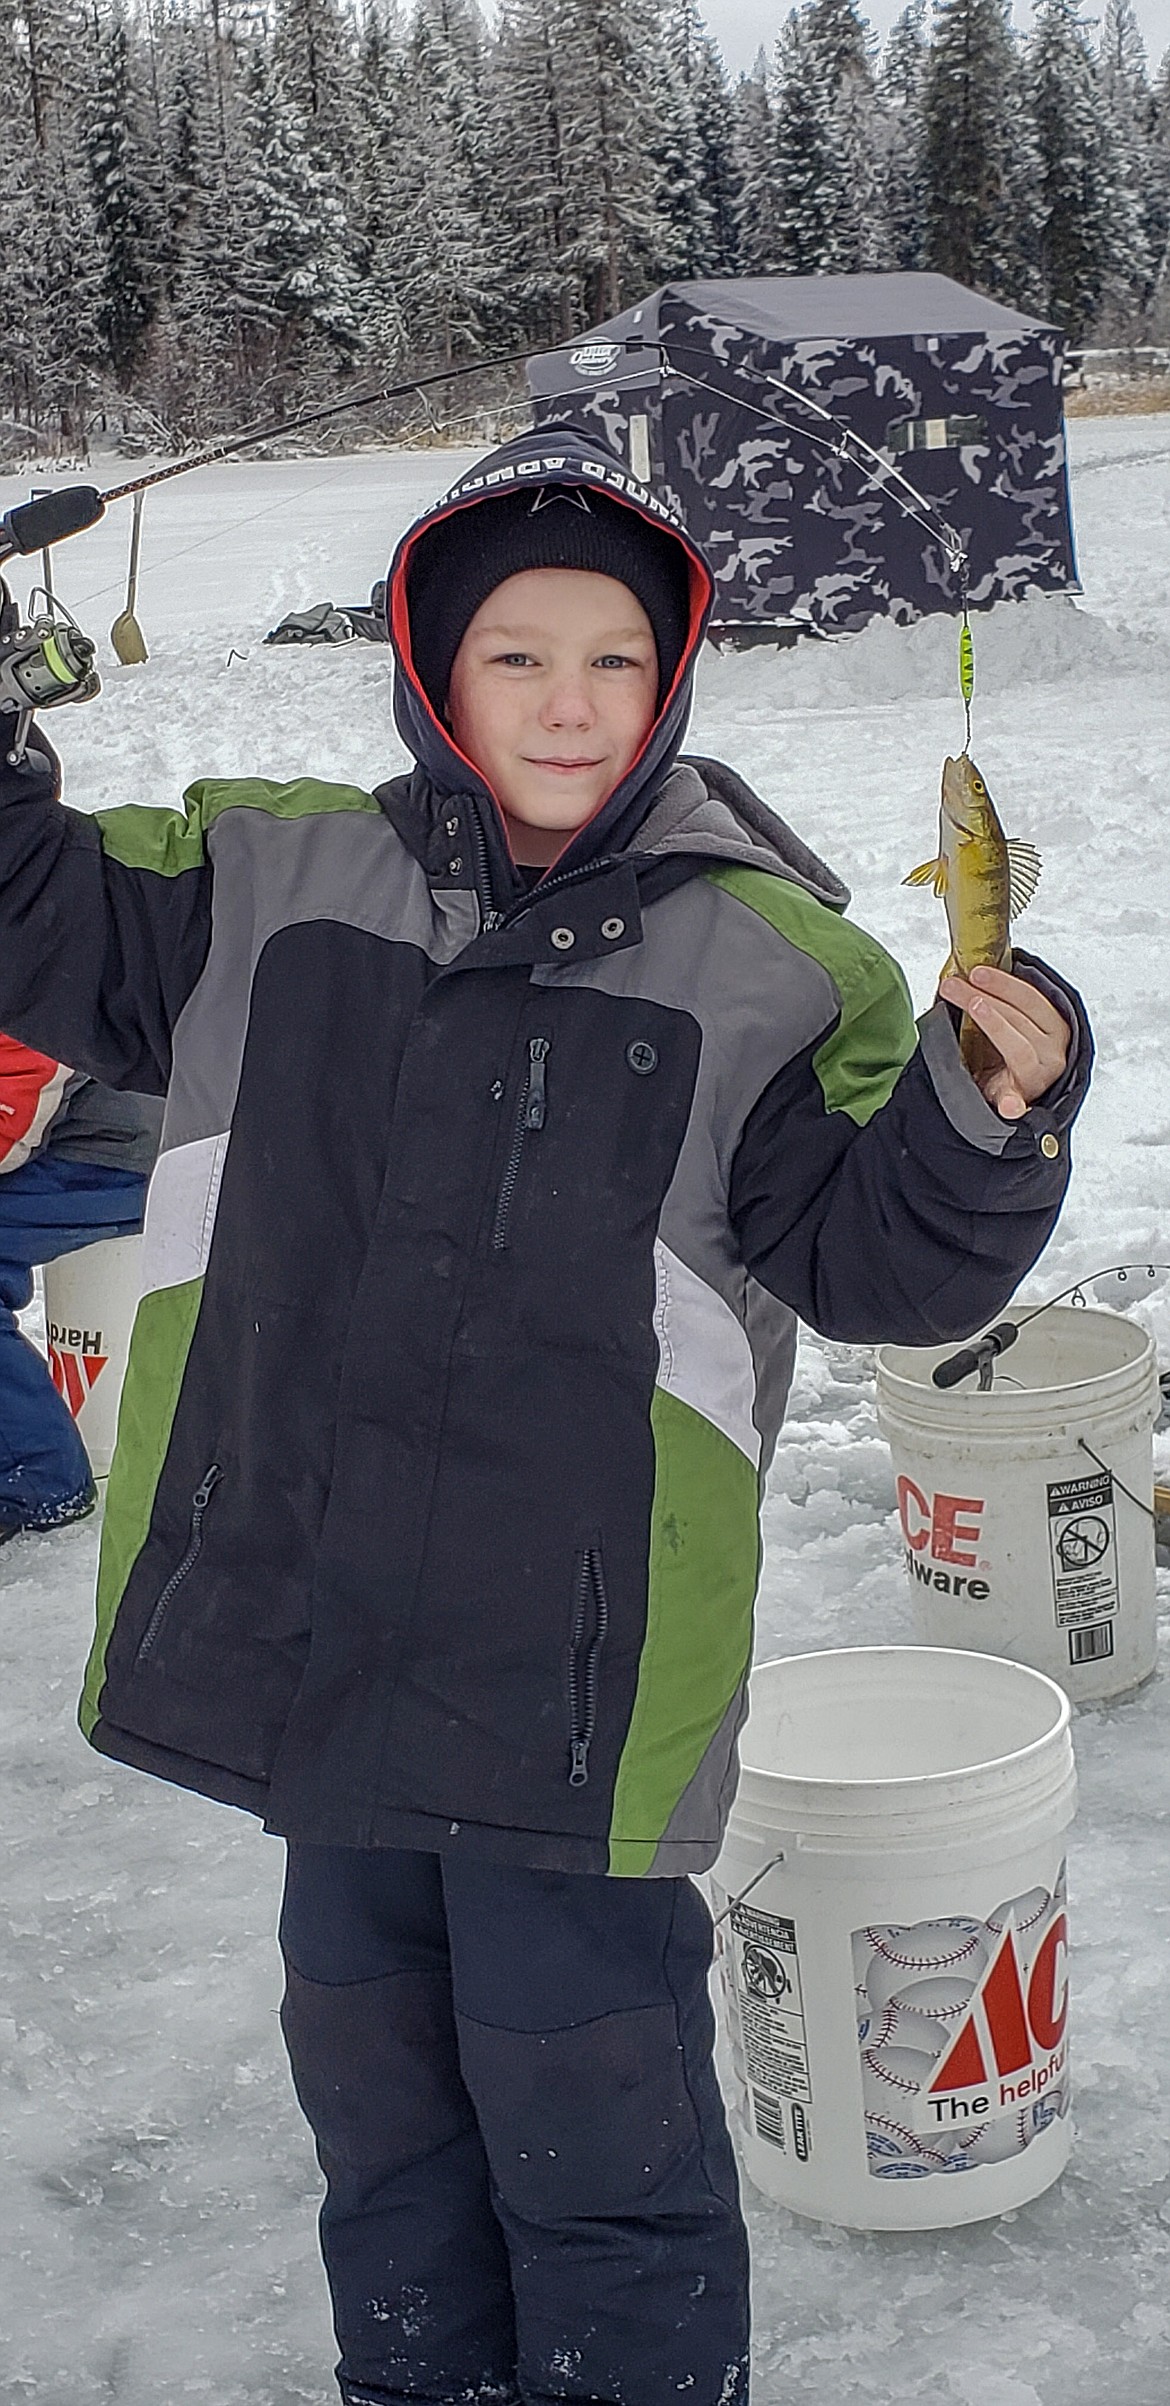 Damion Conroy shows off his catch during the Hooked on Fishing program at Lower Thompson Chain of Lakes State Park Jan. 18. (Rima Austin/The Western News)